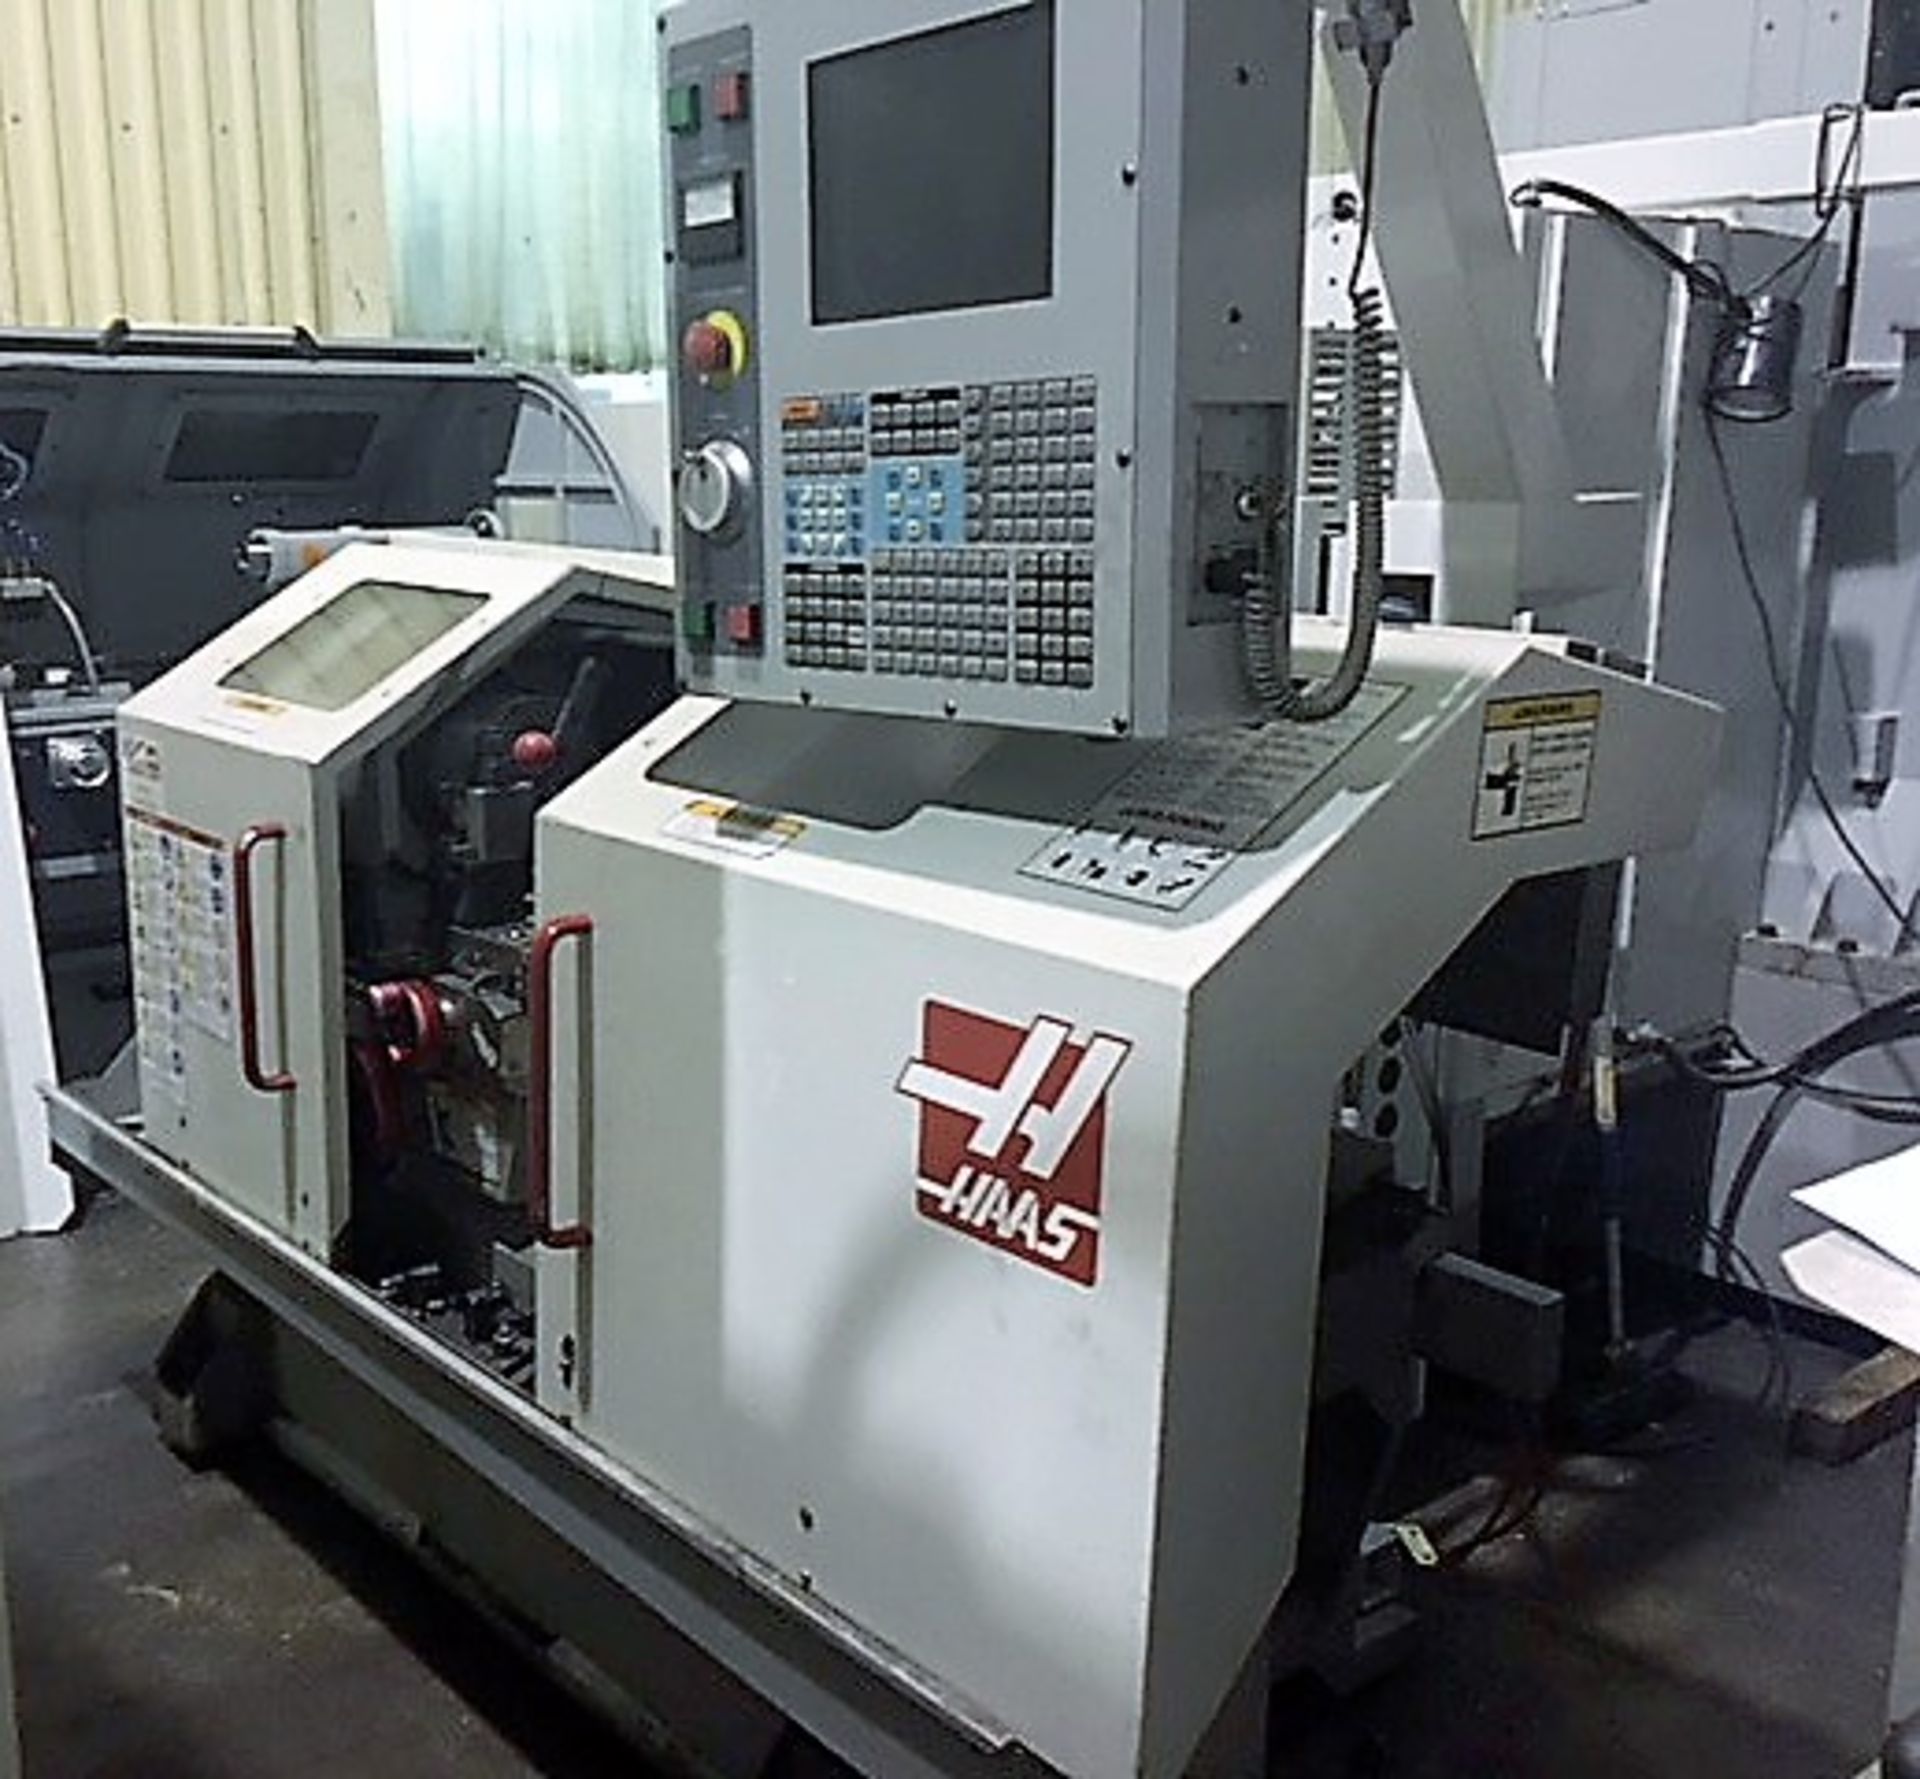 Haas TL-15 CNC Lathe w/Sub Spindle, S/N 65304 New 2002